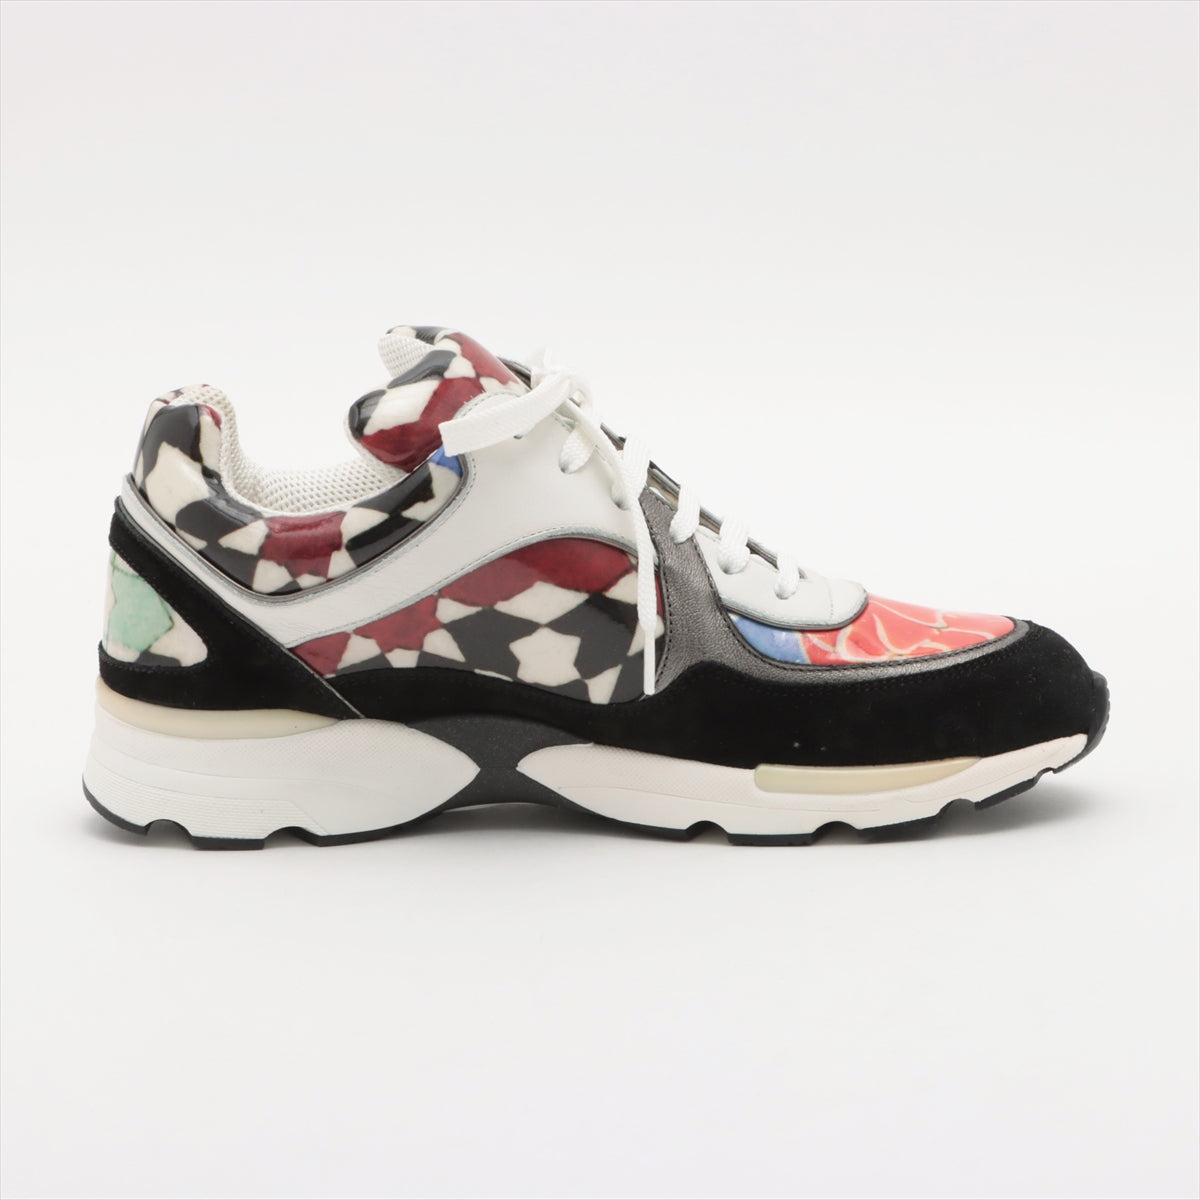 Chanel Coco Mark Leather & patent Sneakers 37 Ladies' Multicolor IG30628